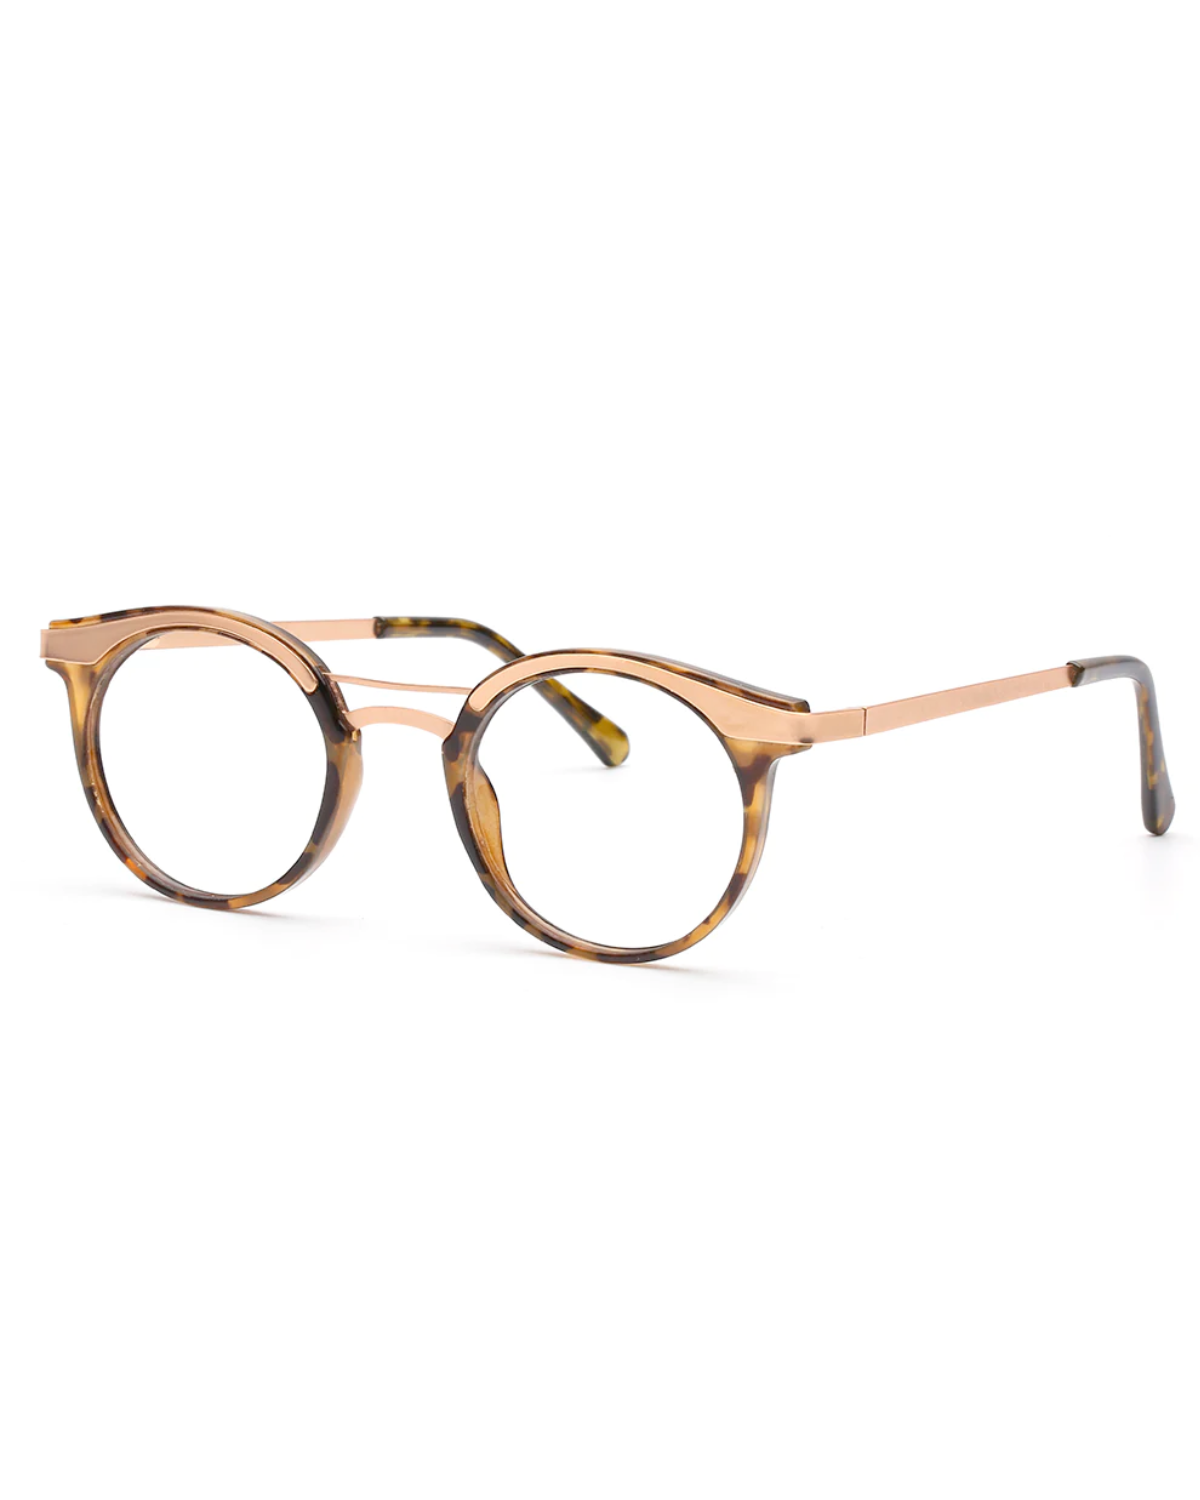 Alessa Rose Gold Metal Frame Readers 1.50 (Tortoise Accent)